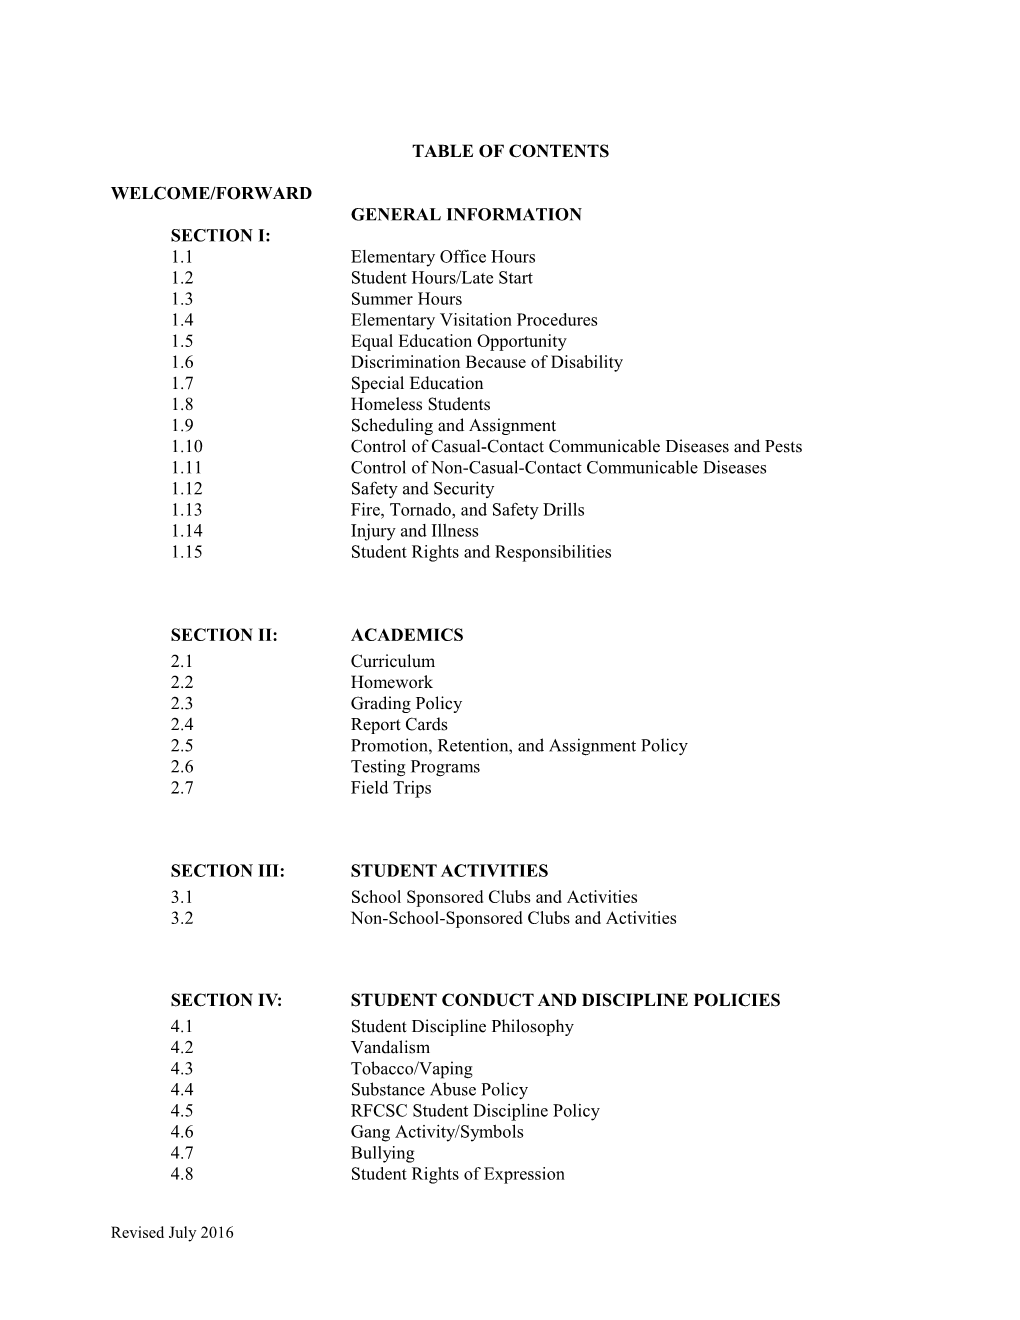 Table of Contents s50